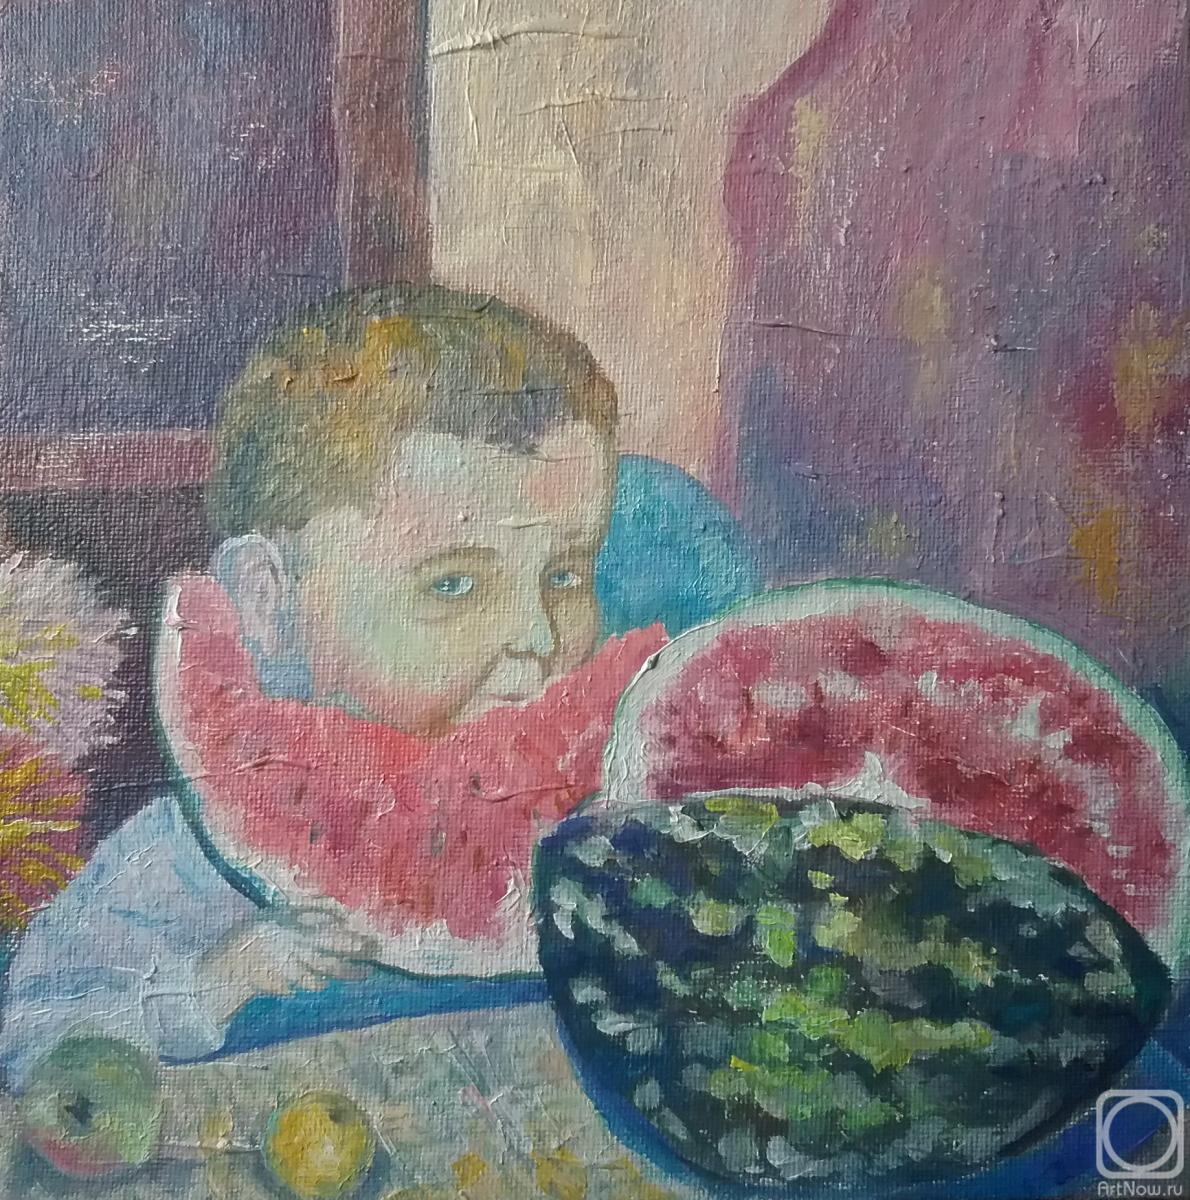 Klenov Andrei. A boy with a watermelon